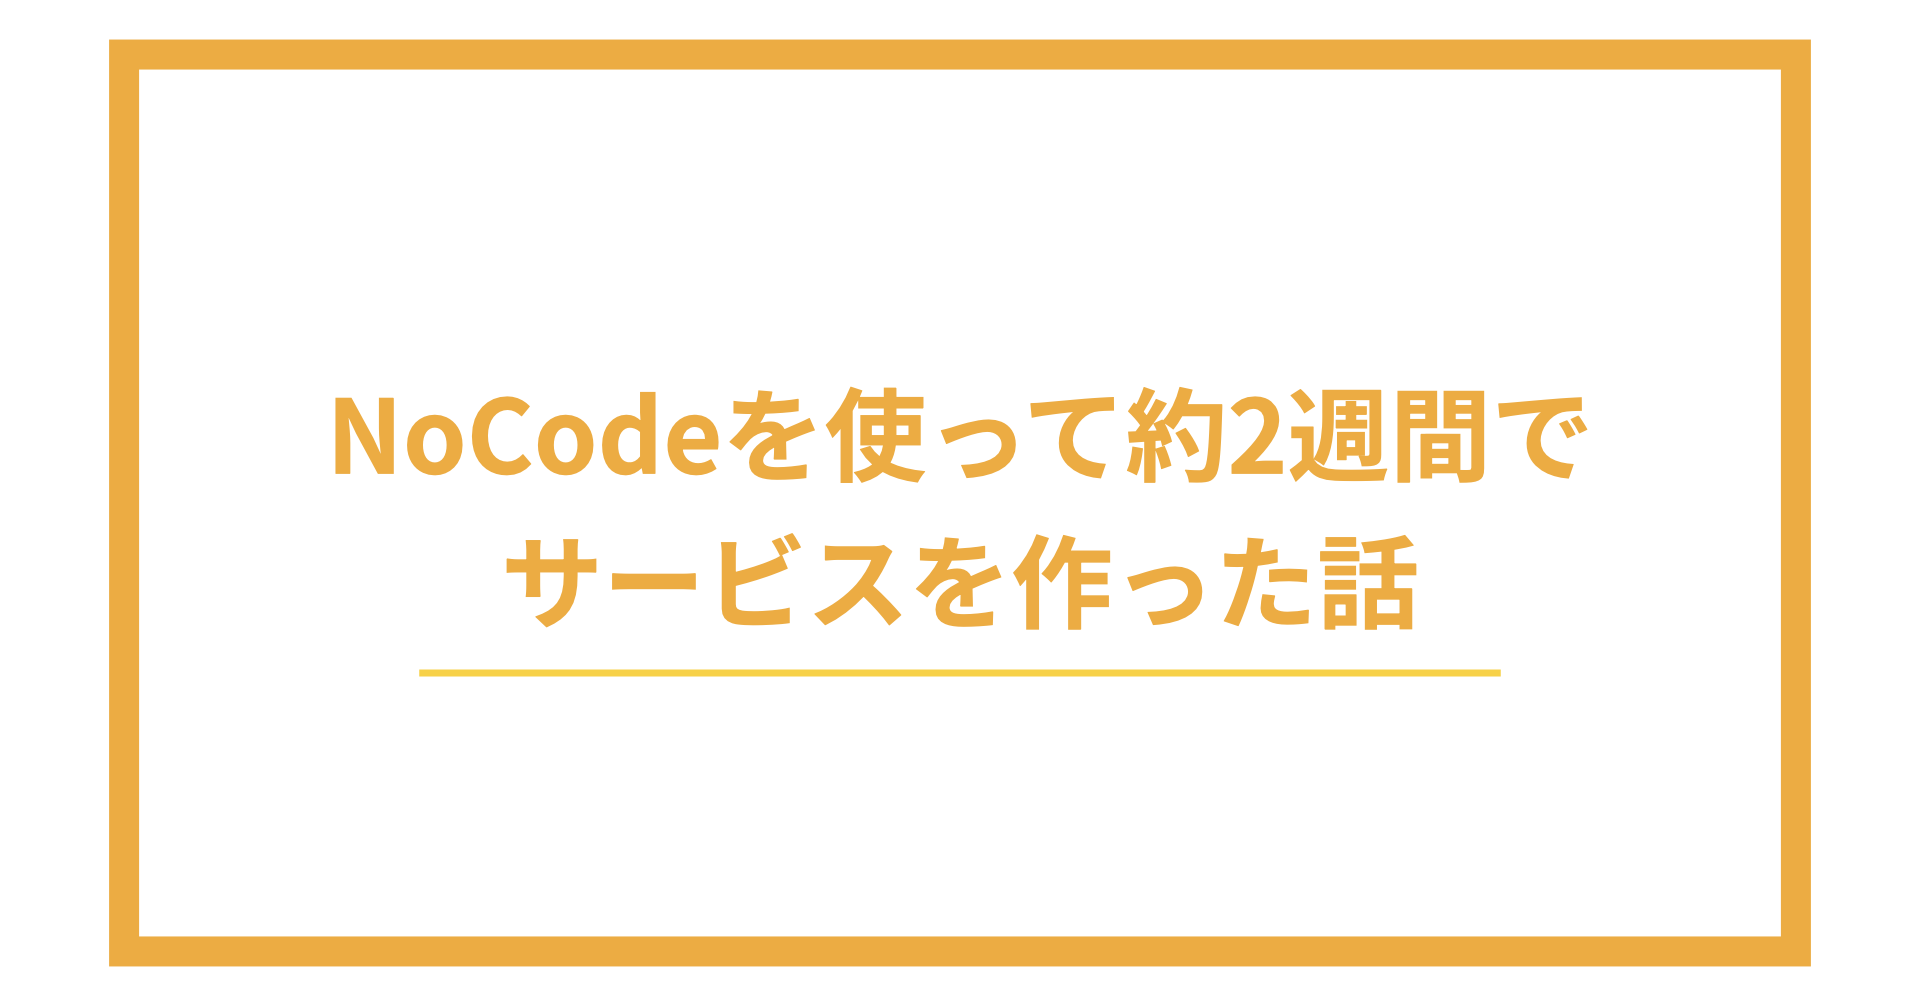 note_nocodeサムネ.001.png